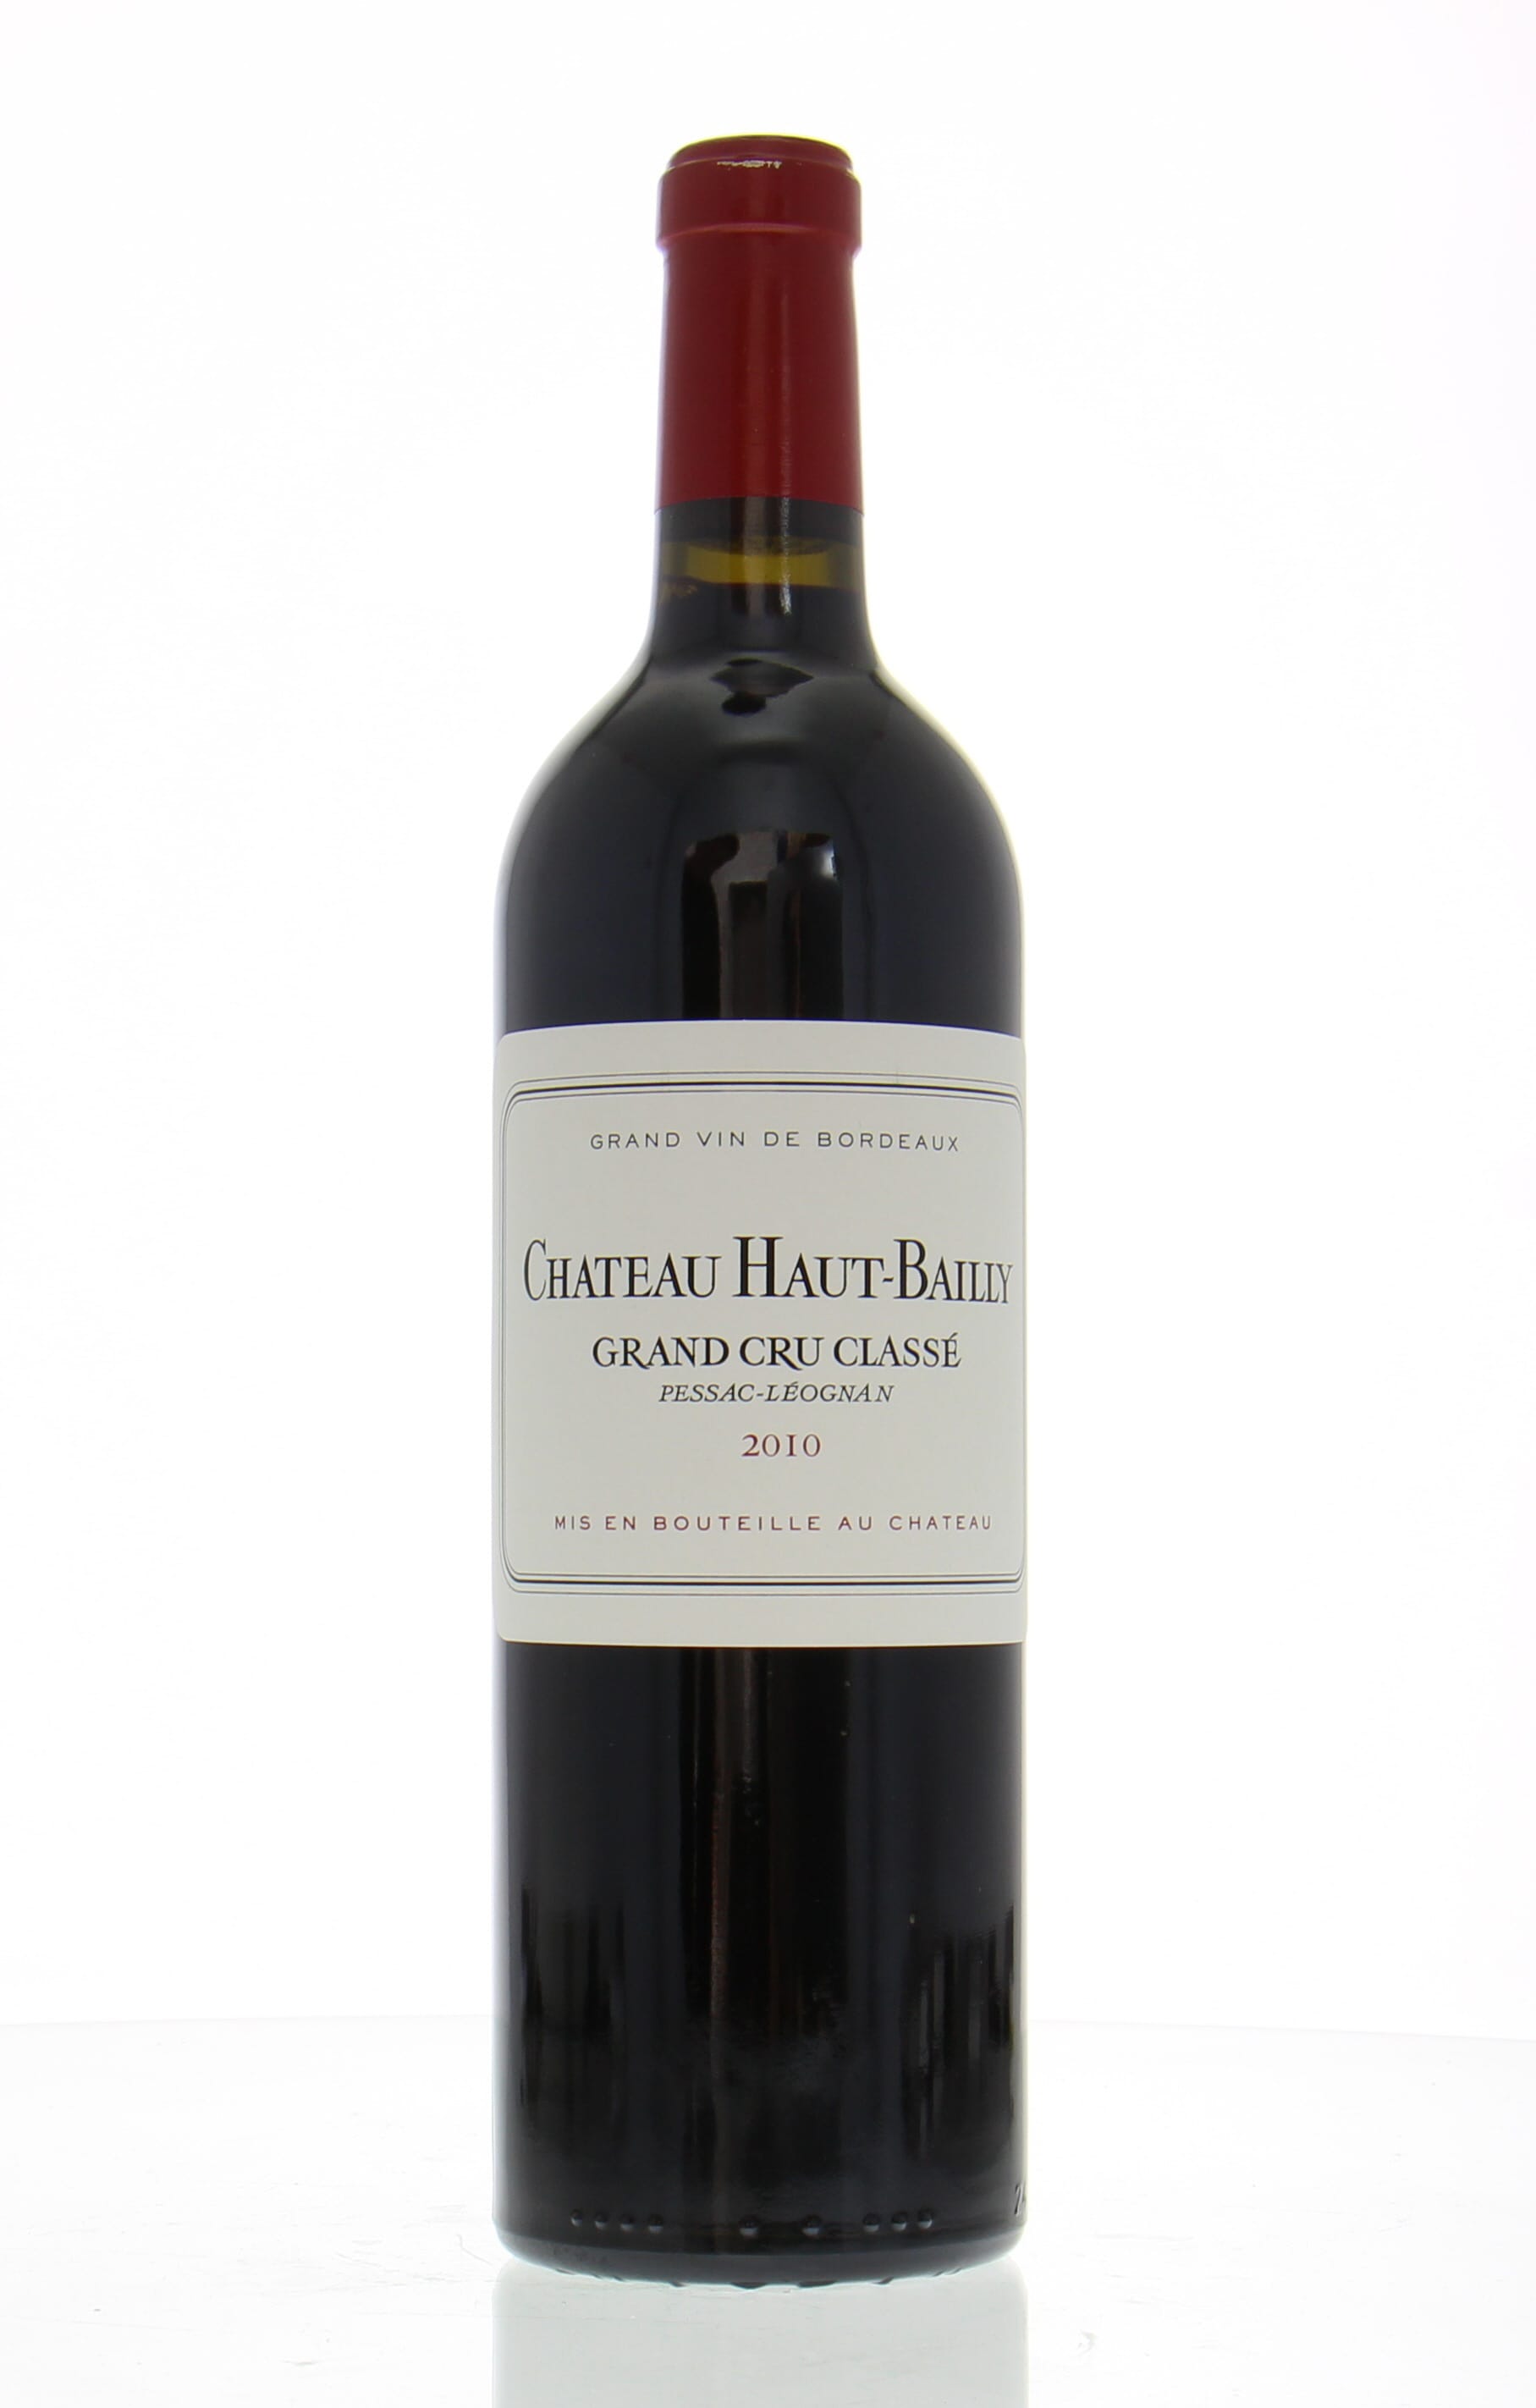 Chateau Haut Bailly - Chateau Haut Bailly 2010 From Original Wooden Case